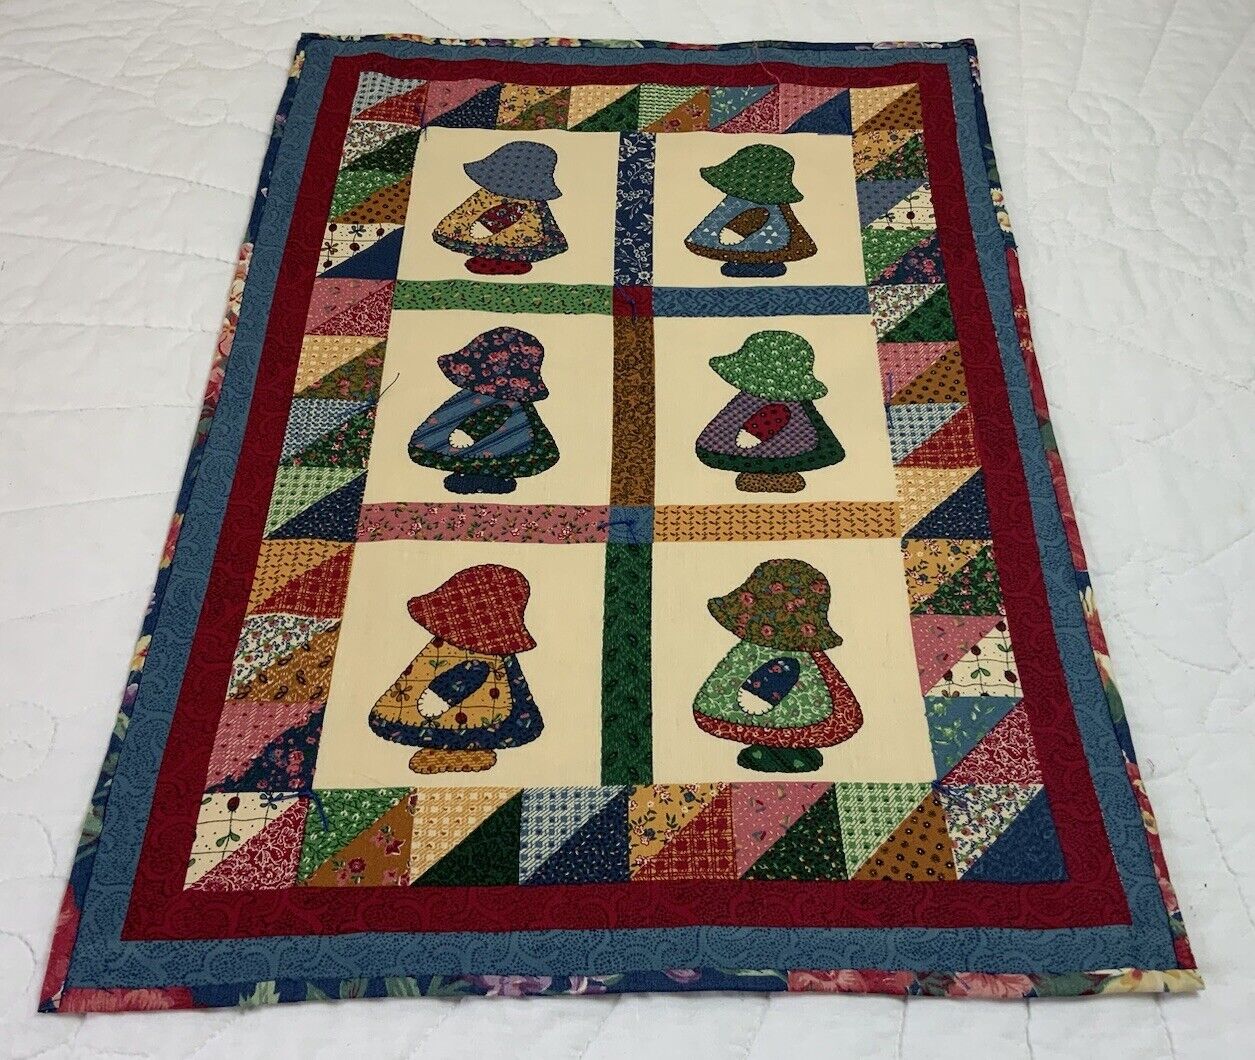 Vintage Country Quilt Wall Hanging, Sunbonnet Sue, Printed Design, Multi Color